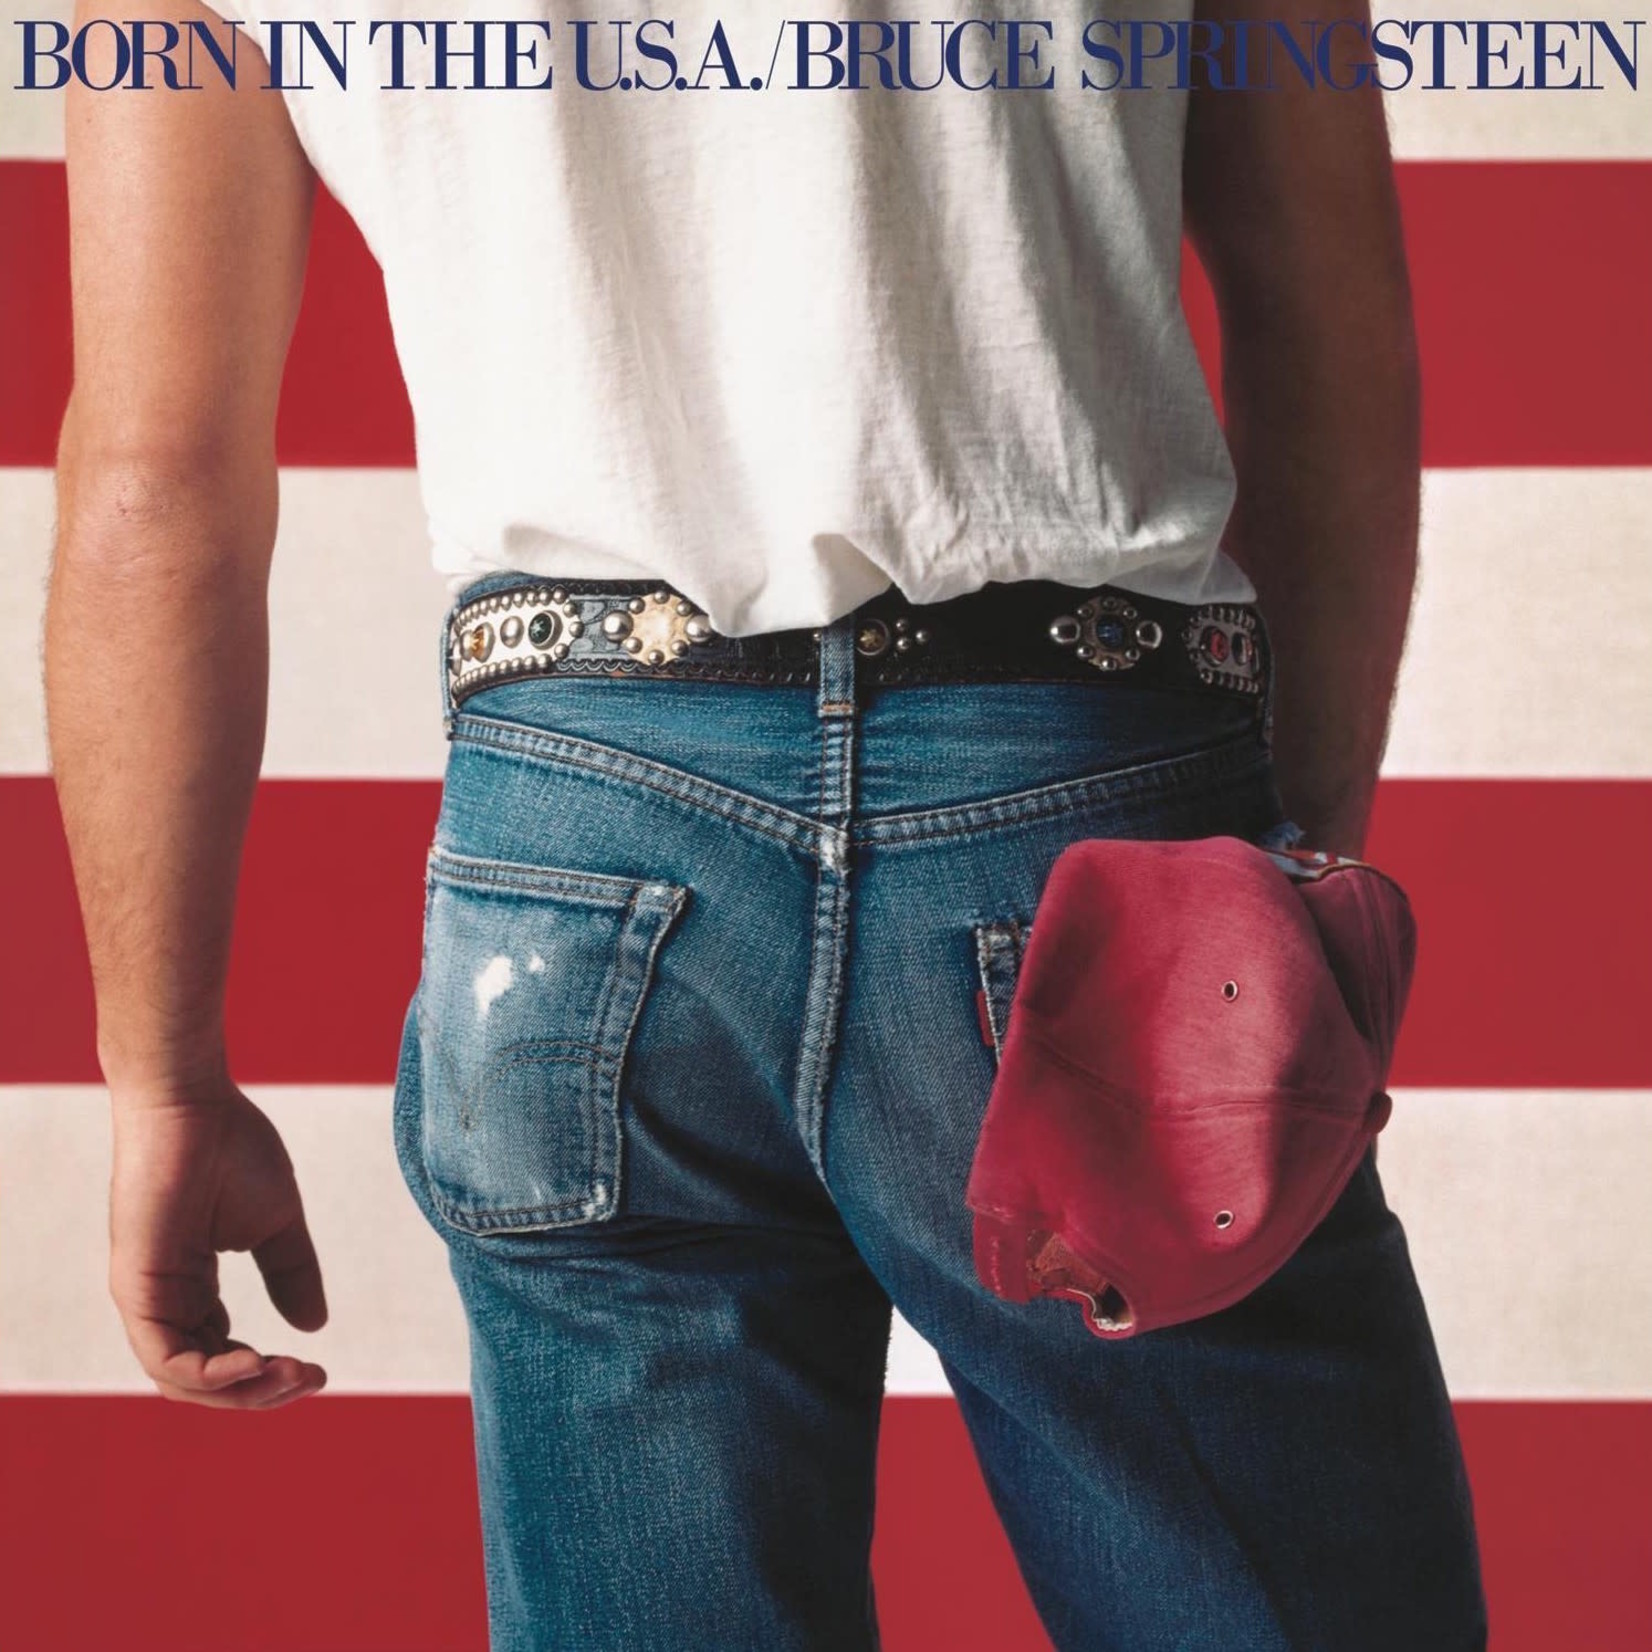 [Vintage] Bruce Springsteen - Born in the USA